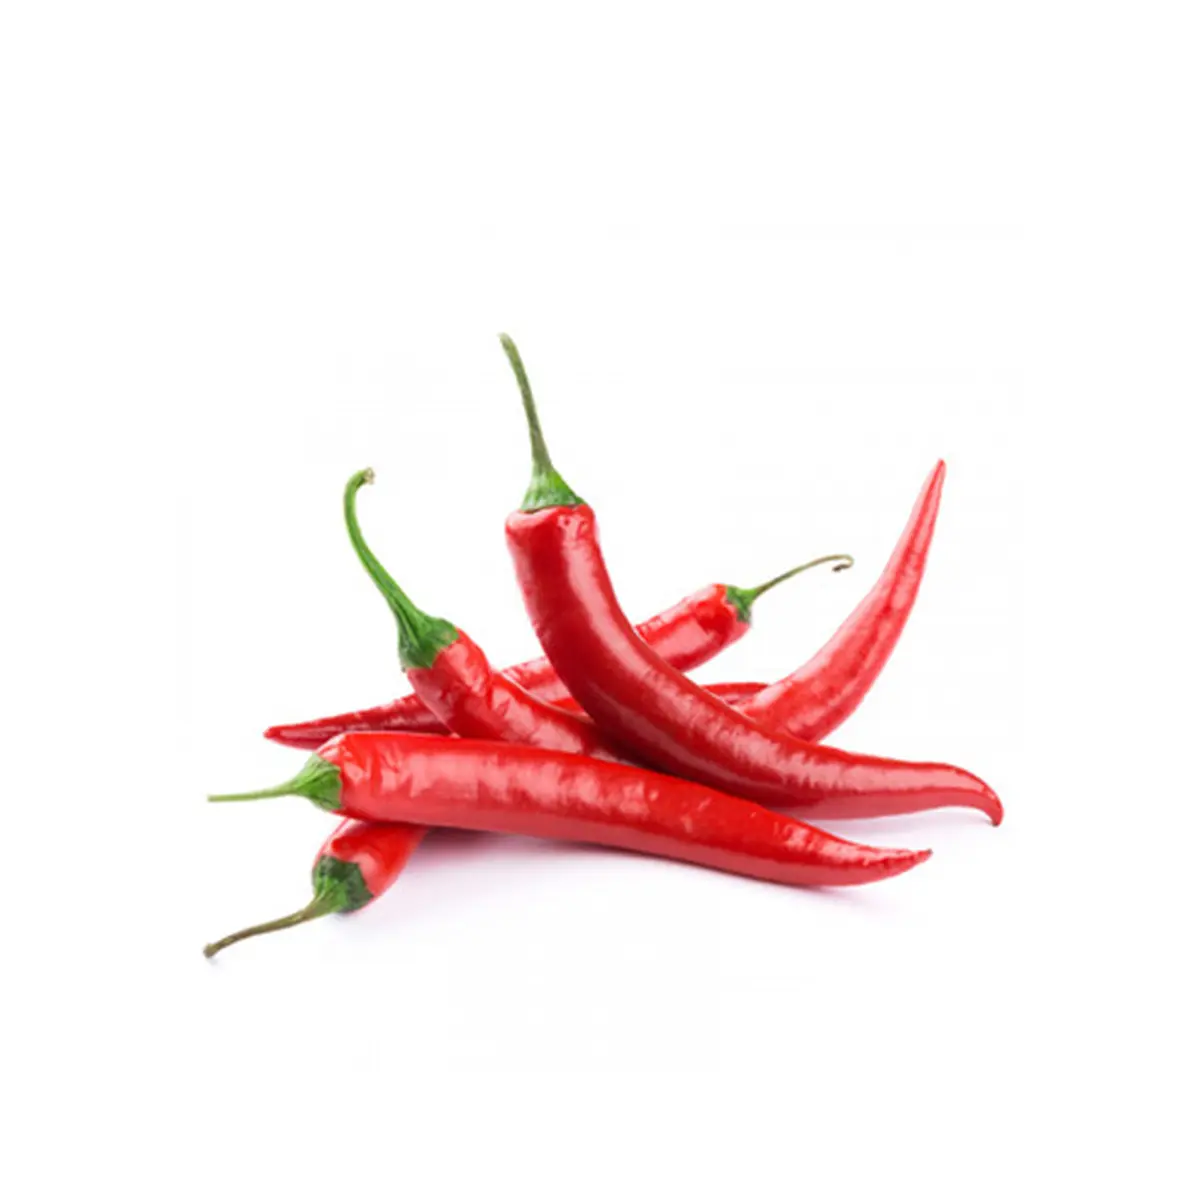 Chilli Thai Red Kg - Buy Asian Products In Bulk / Buy Vegetables in Bulk /  Herbs, Chilli and Spi